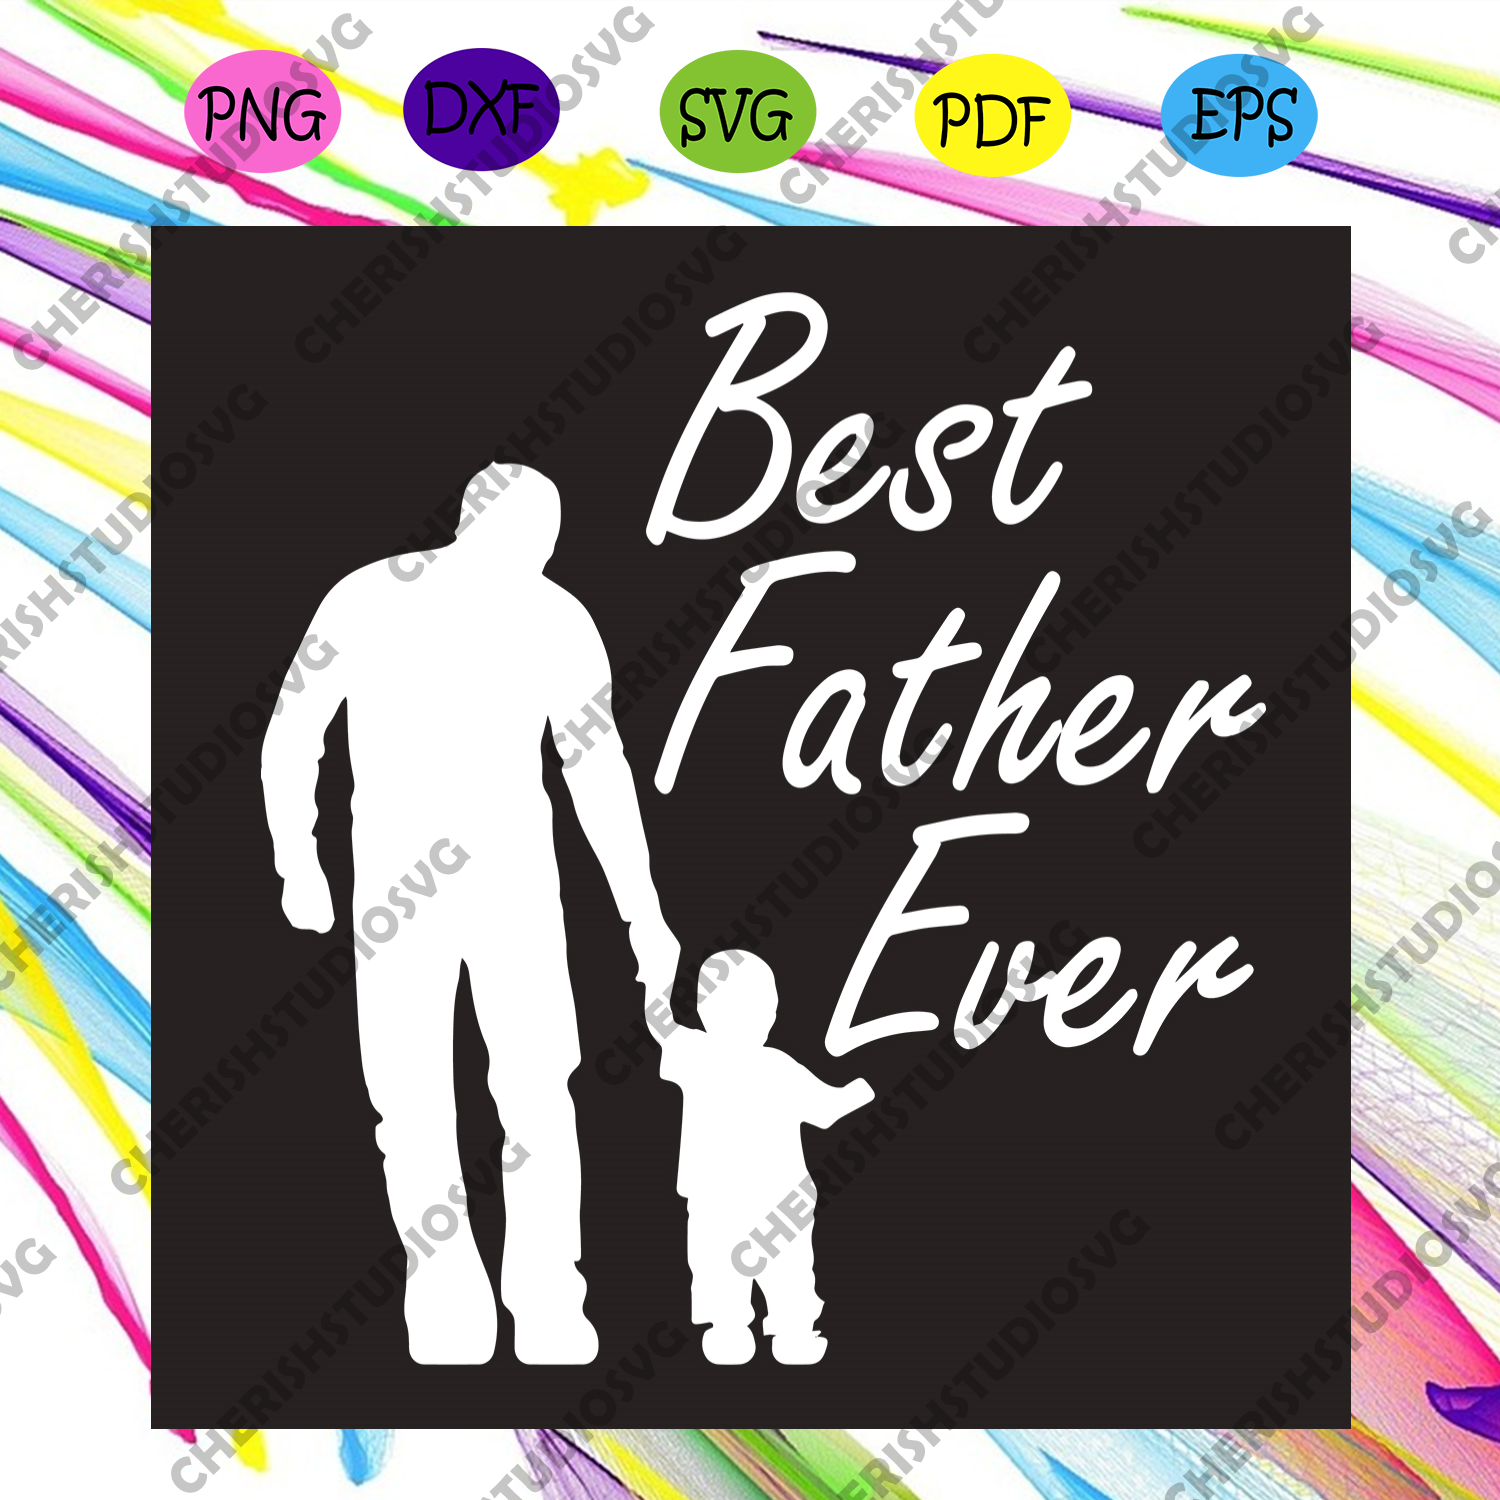 Download Best Father Ever Svg Fathers Day Svg Best Father Svg Best Dad Svg Cherishsvgstudio